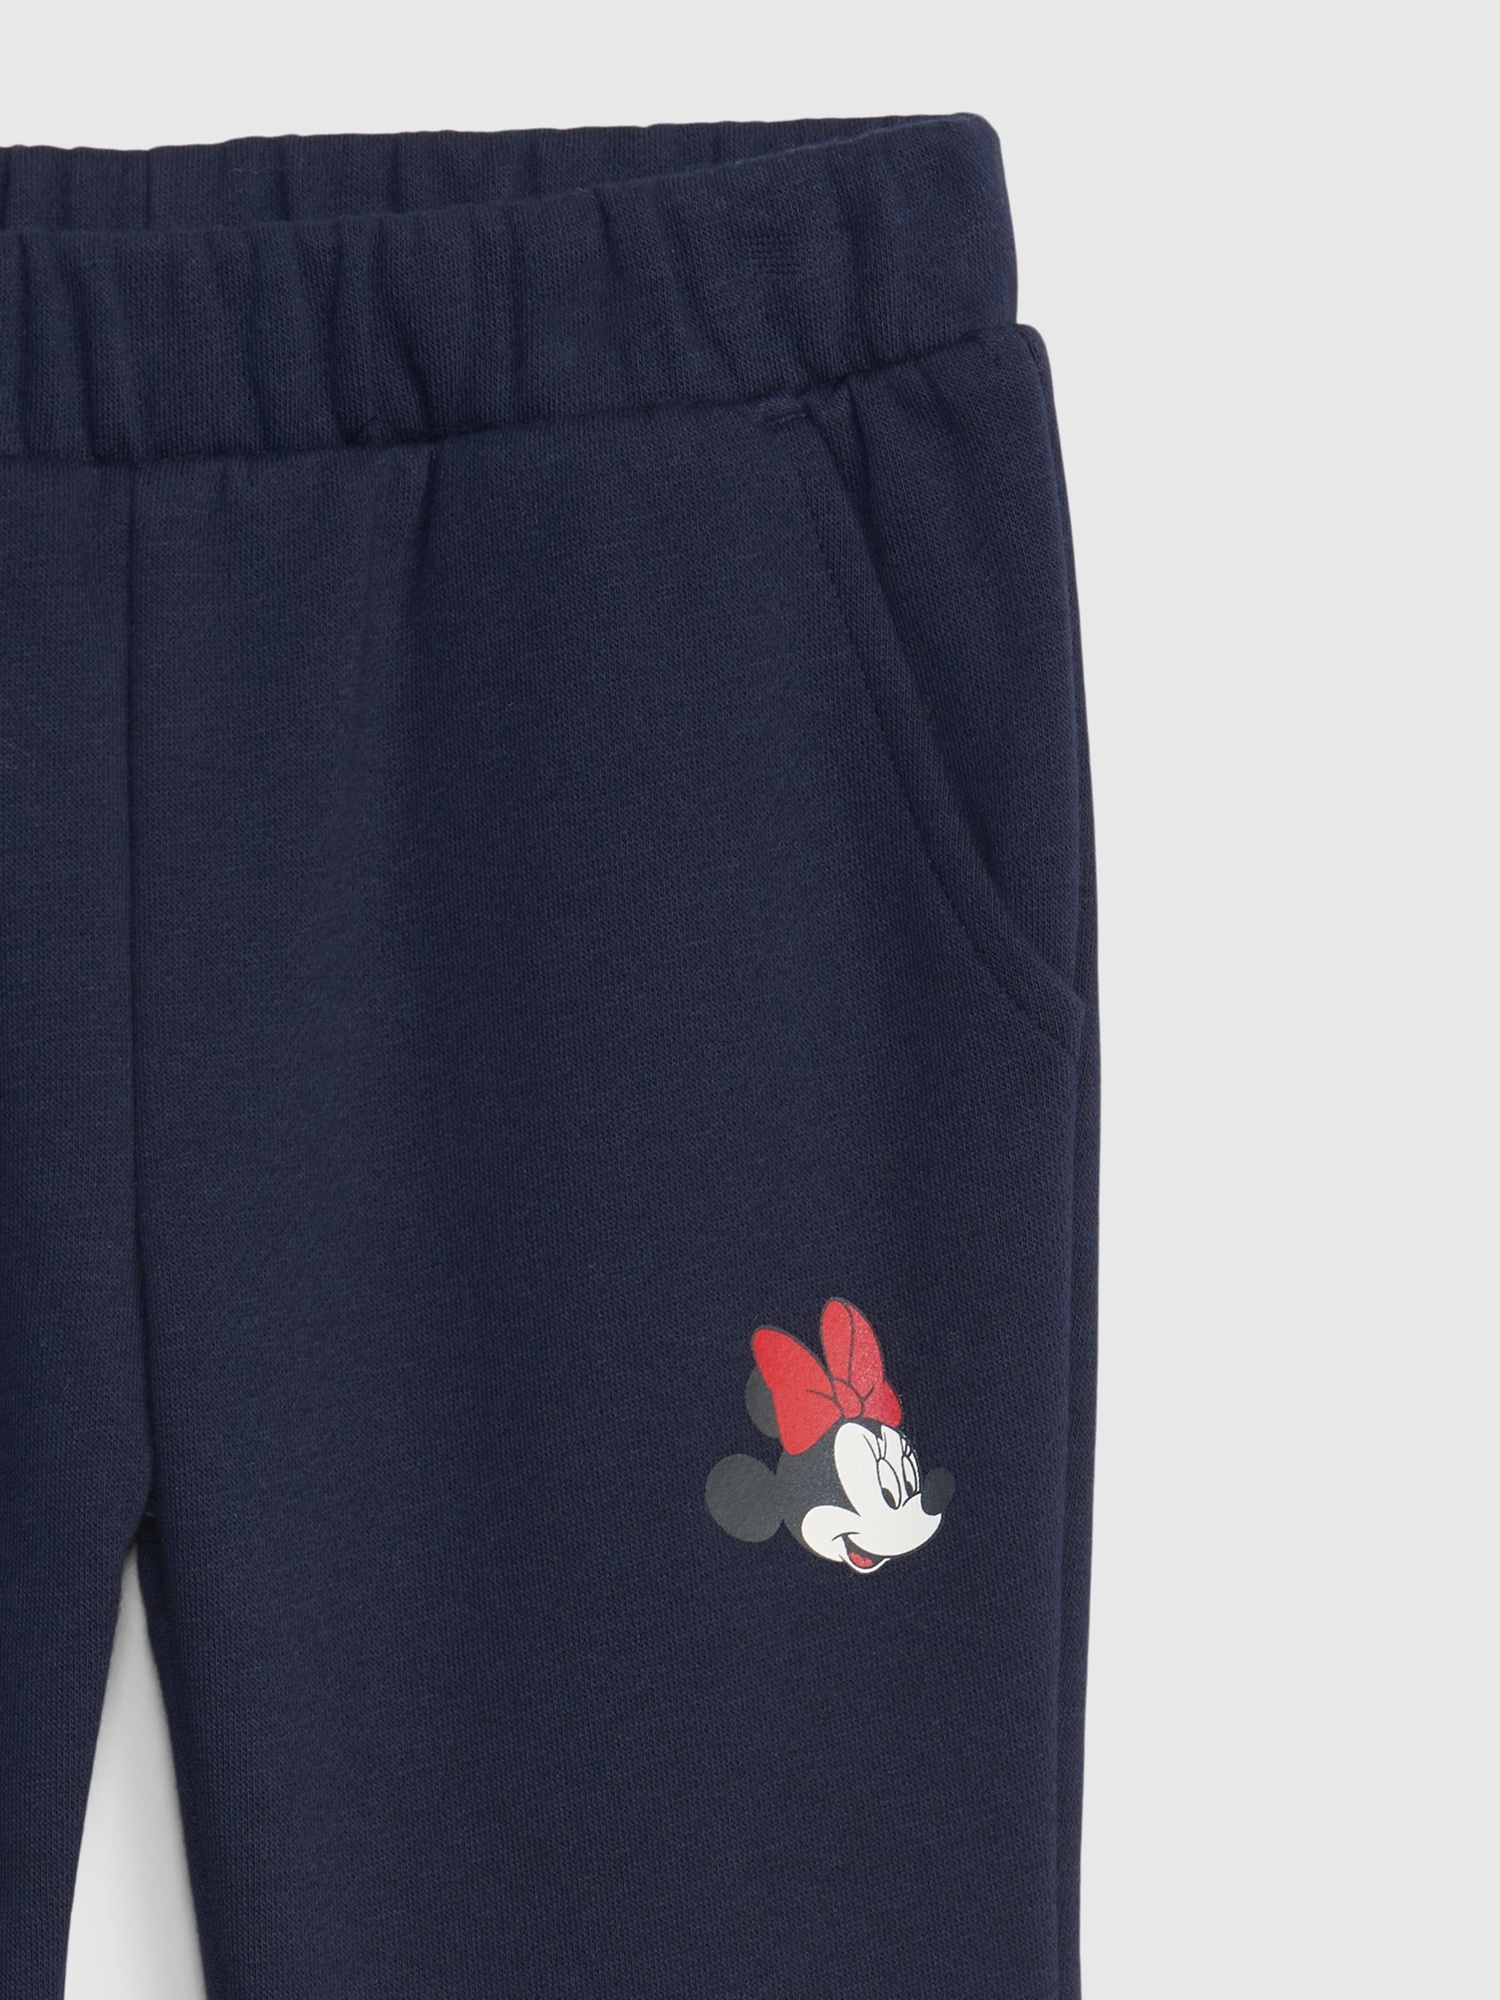 Disney Womens Soft Fleece Mickey Mouse Graphic Jogger Pants White - Size XL  NEW